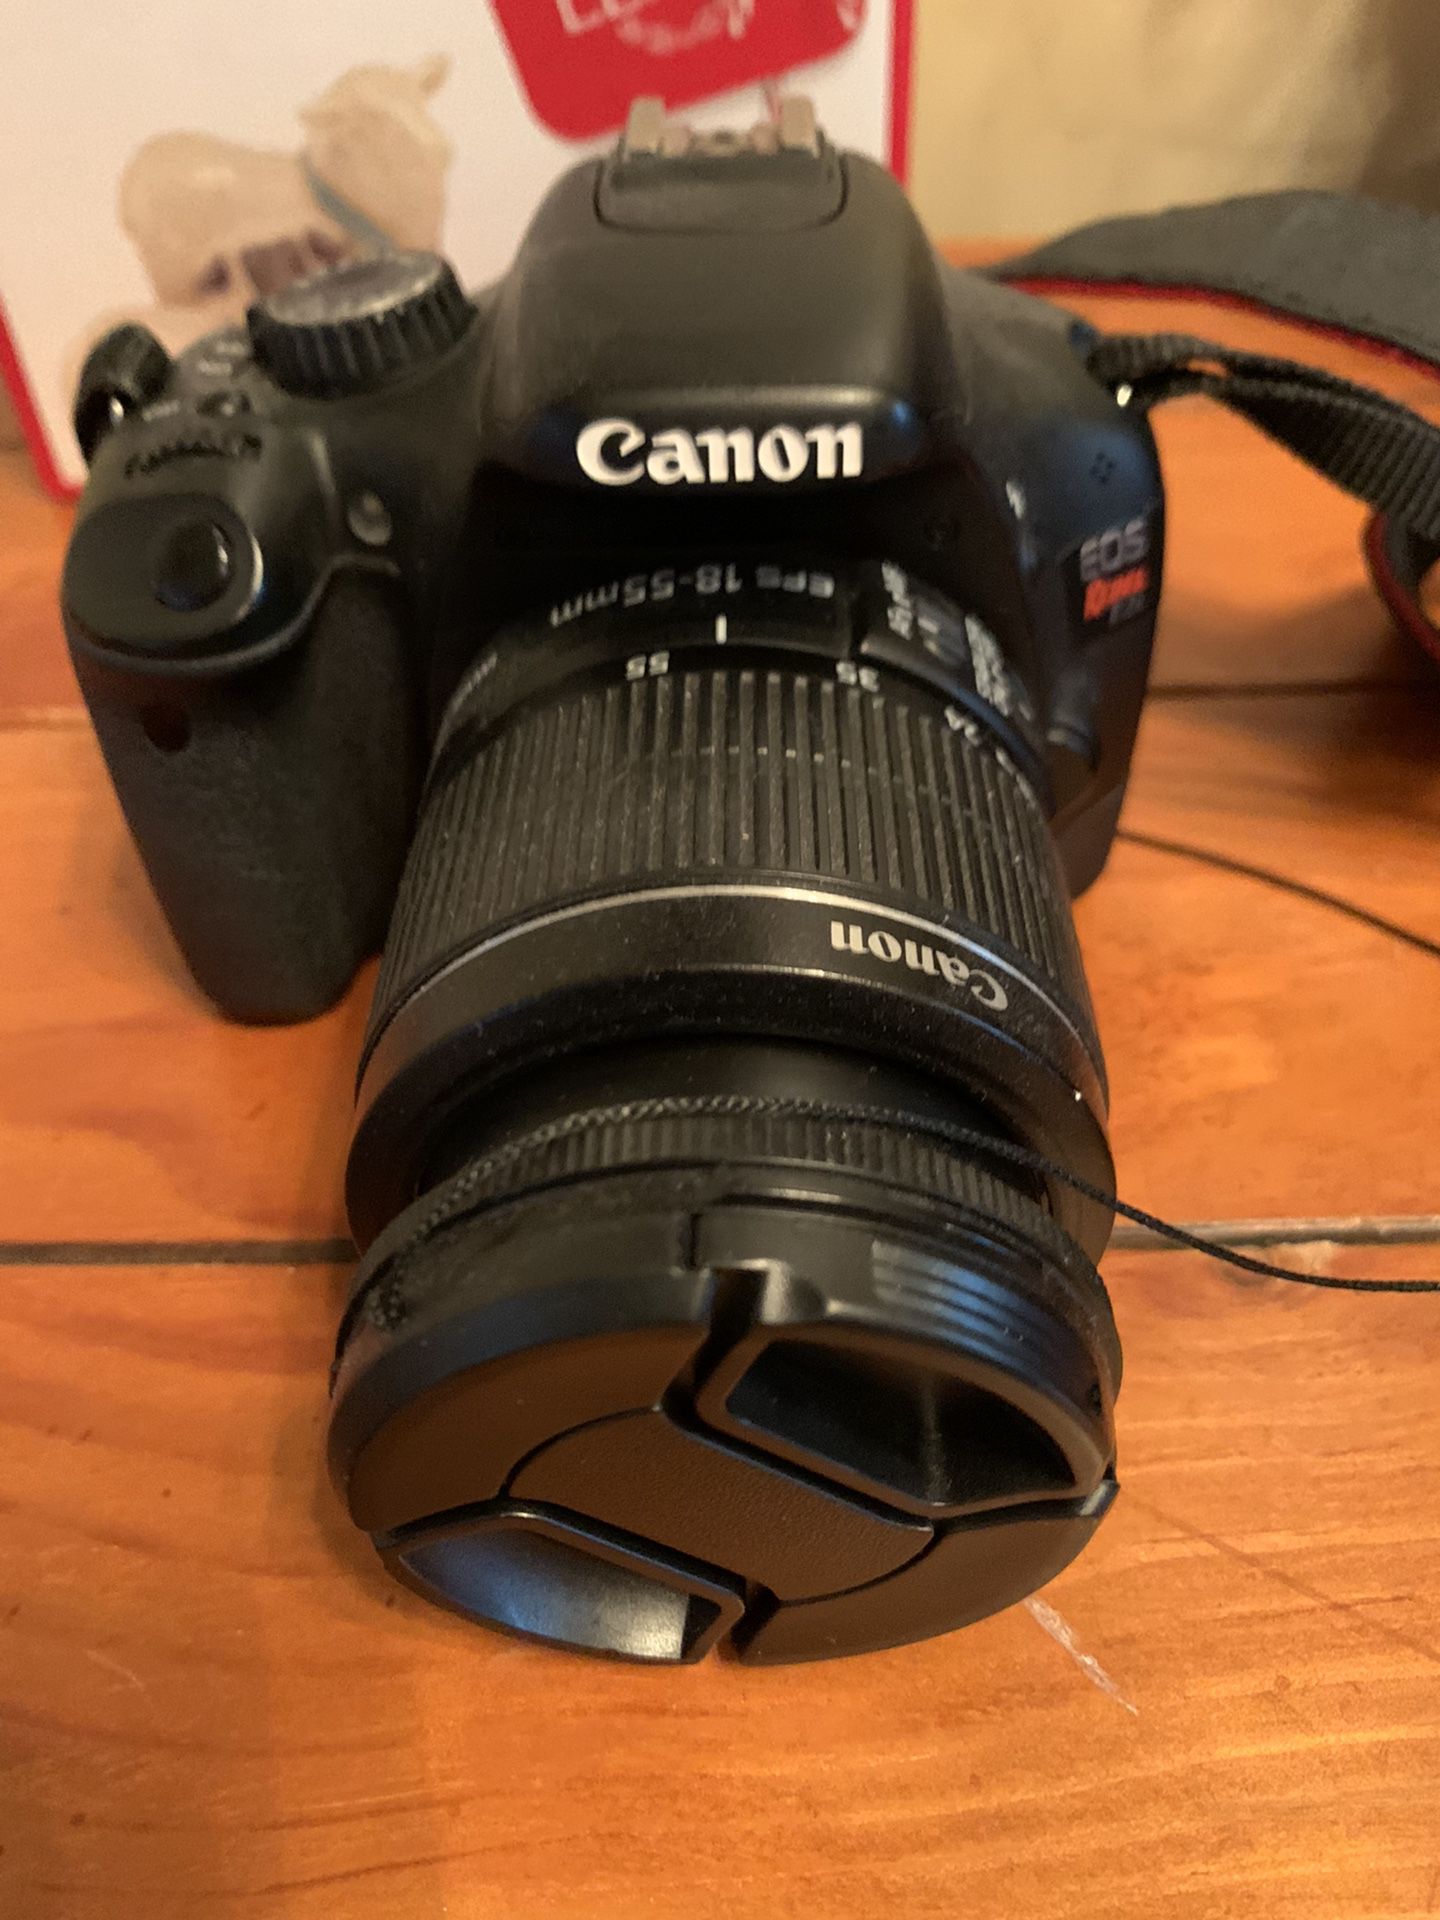 Canon EOS Rebel T2i  Two Lenses (18-55mm And 55-250mm)  Charger and Two Batteries 